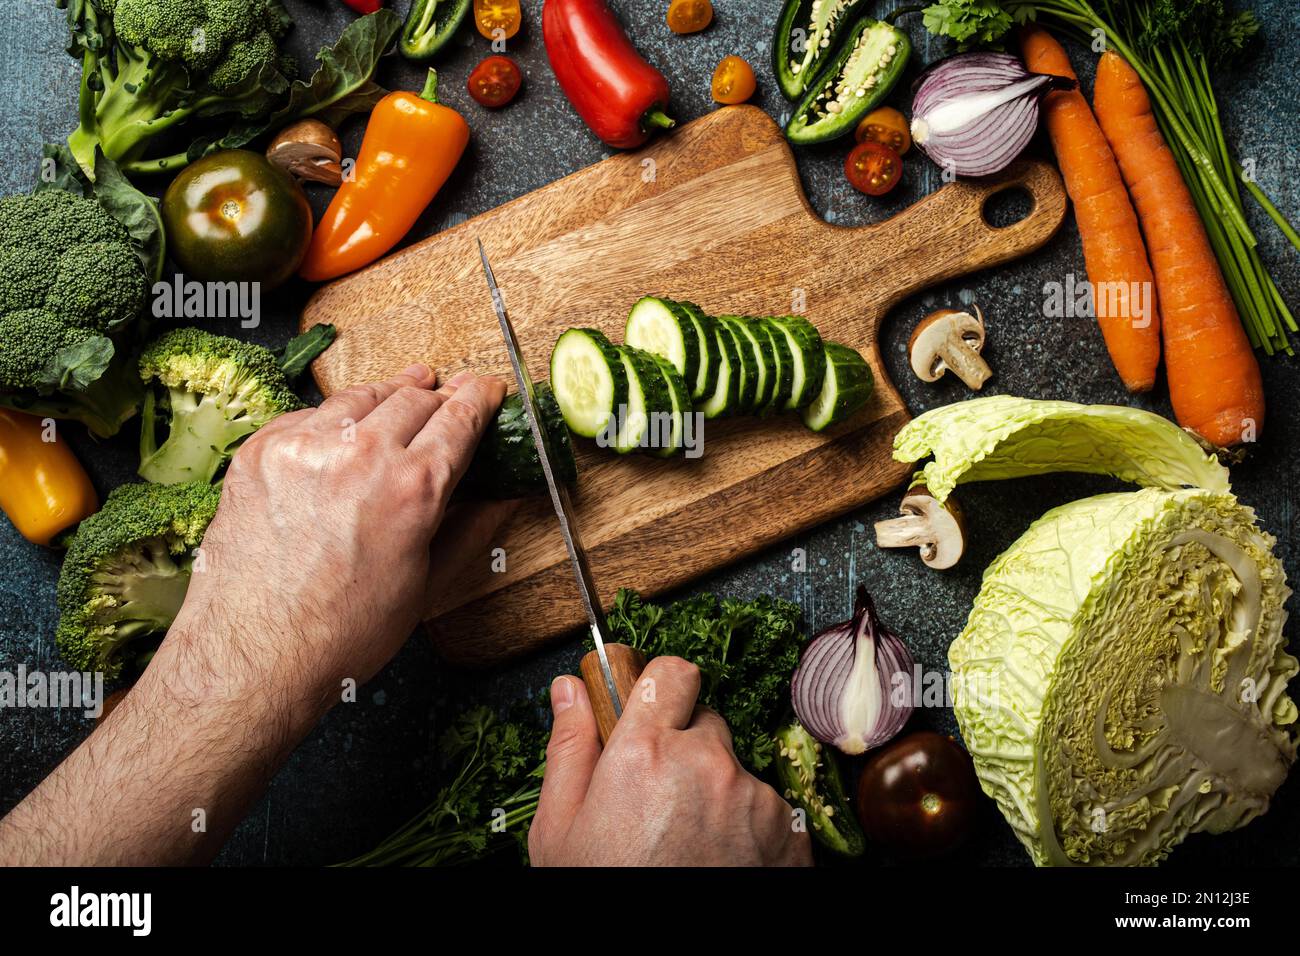 White man hands chopping cucumber on wooden cutting board with knife and assorted fresh vegetables on rustic concrete table, diet and vegetarian food Stock Photo